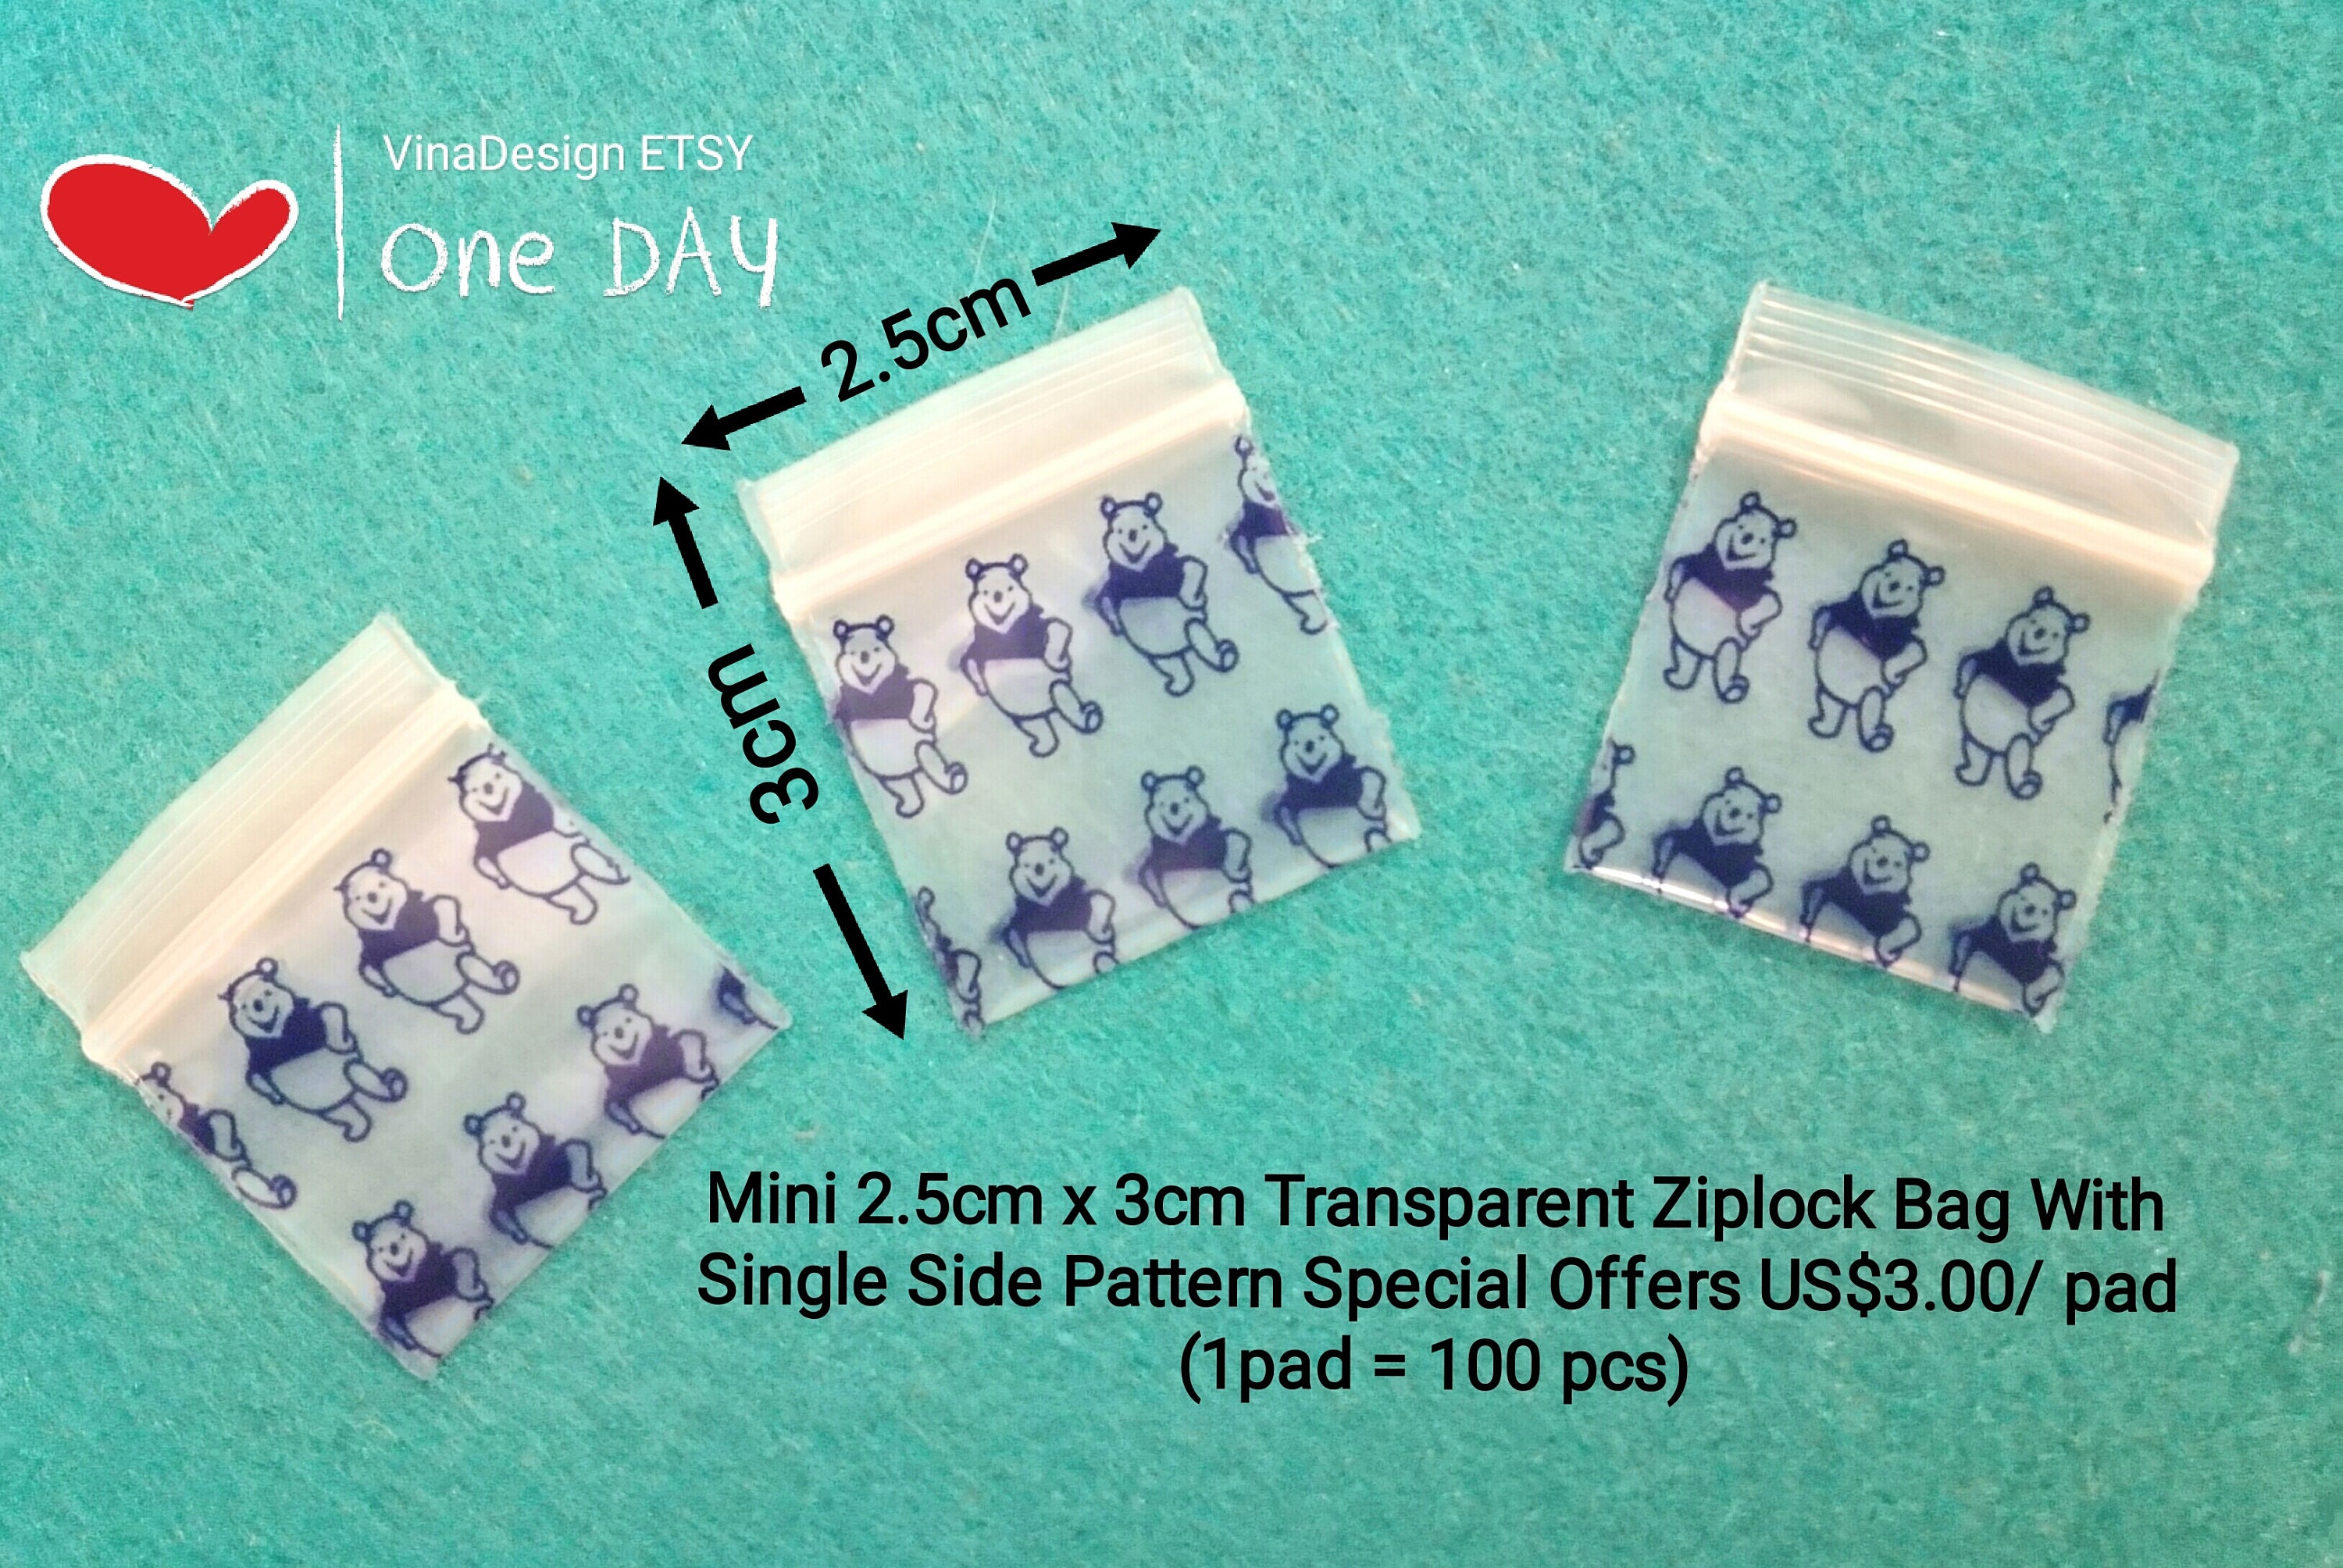 Mini Zip Bags/packs of Tiny 1.5inch by 1.5inch Polyvinyl Apple Brand Baggies  